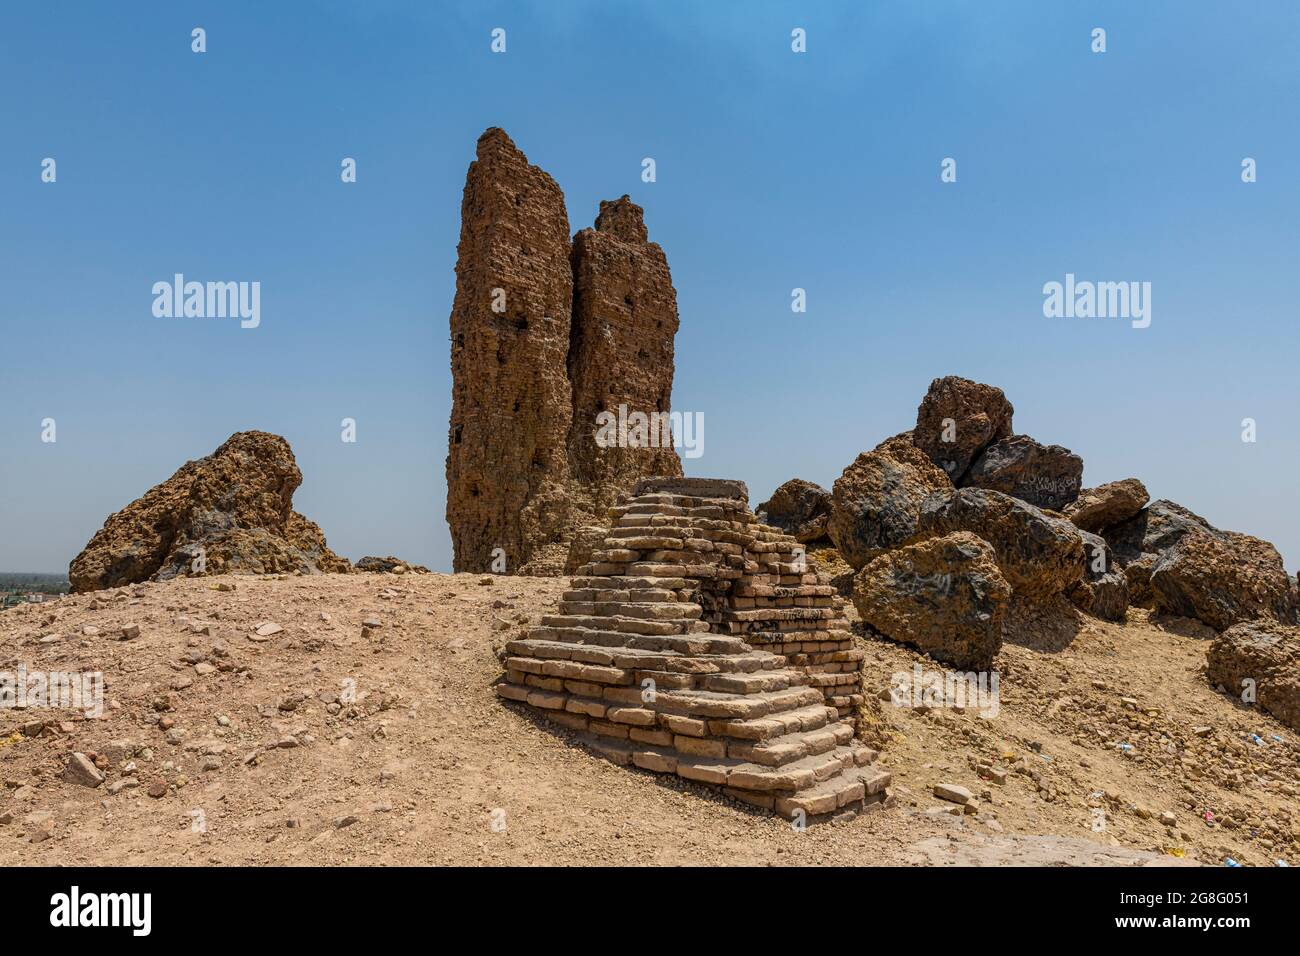 Archaeological site, Borsippa, Iraq, Middle East Stock Photo